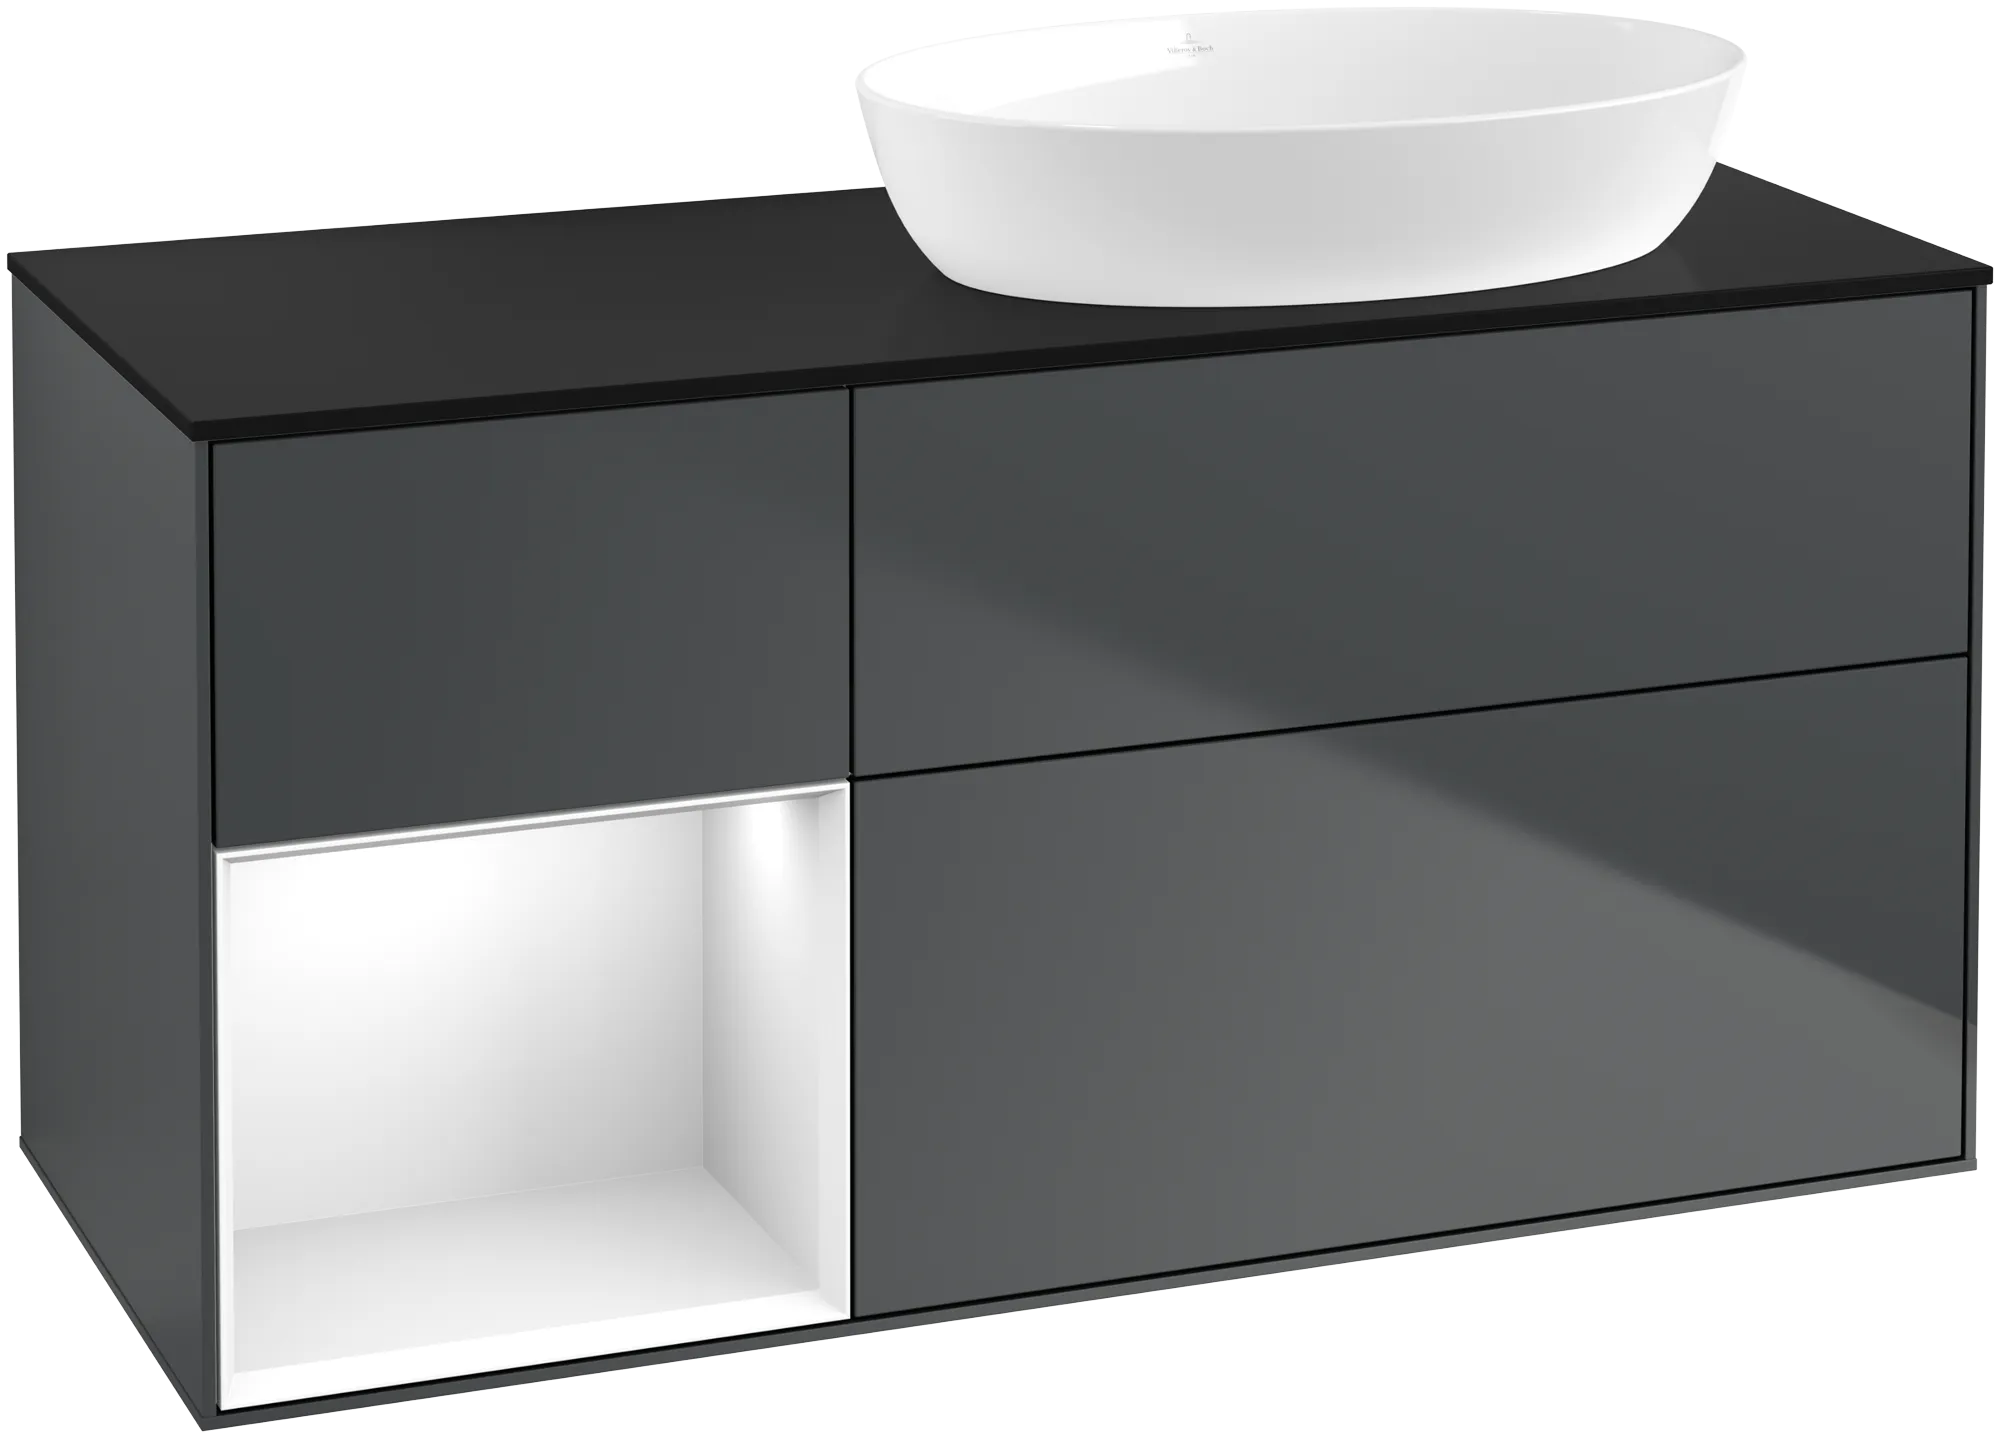 Picture of VILLEROY BOCH Finion Vanity unit, with lighting, 3 pull-out compartments, 1200 x 603 x 501 mm, Midnight Blue Matt Lacquer / Glossy White Lacquer / Glass Black Matt #GA42GFHG